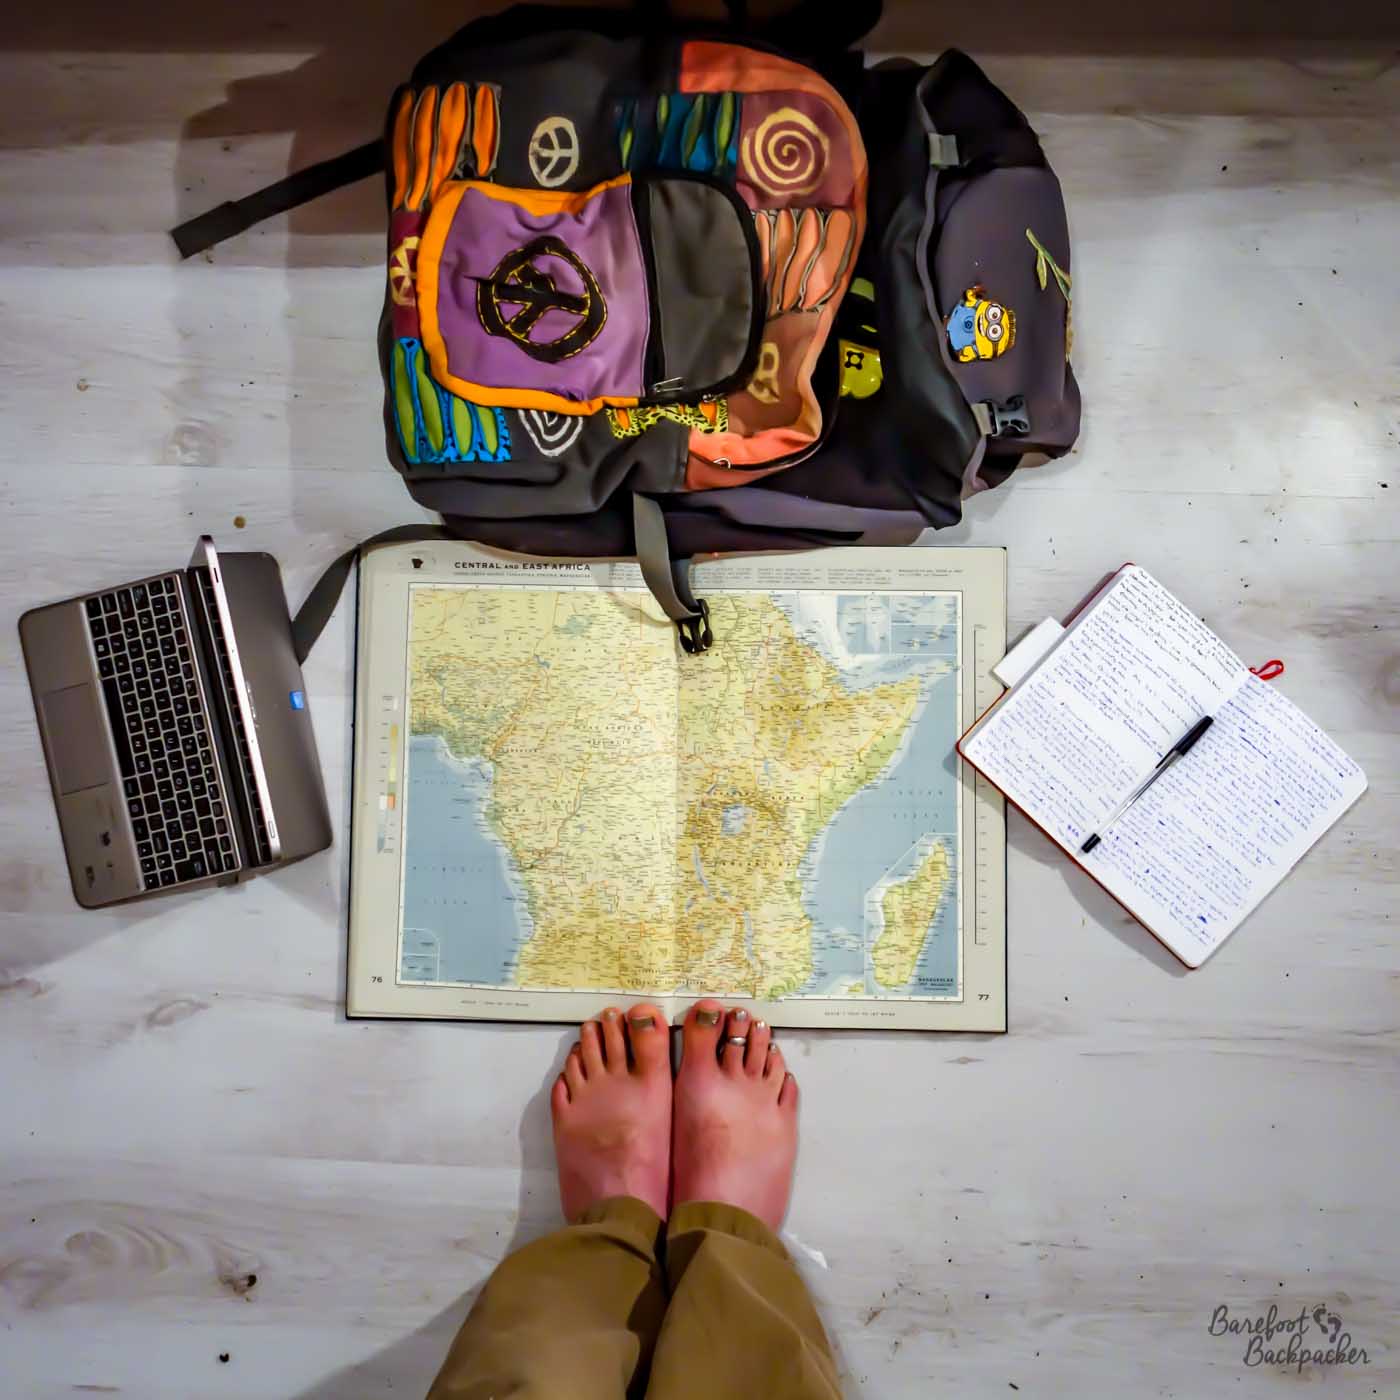 On the floor in a bedroom; the floor is lain with laminate slats. In the centre of shot is an old world atlas, open to a page on Central Africa. At the top of it is a fabric daypack, to the left is a tablet computer, to the right is a notebook and pen, and below the atlas are a pair of bare feet.